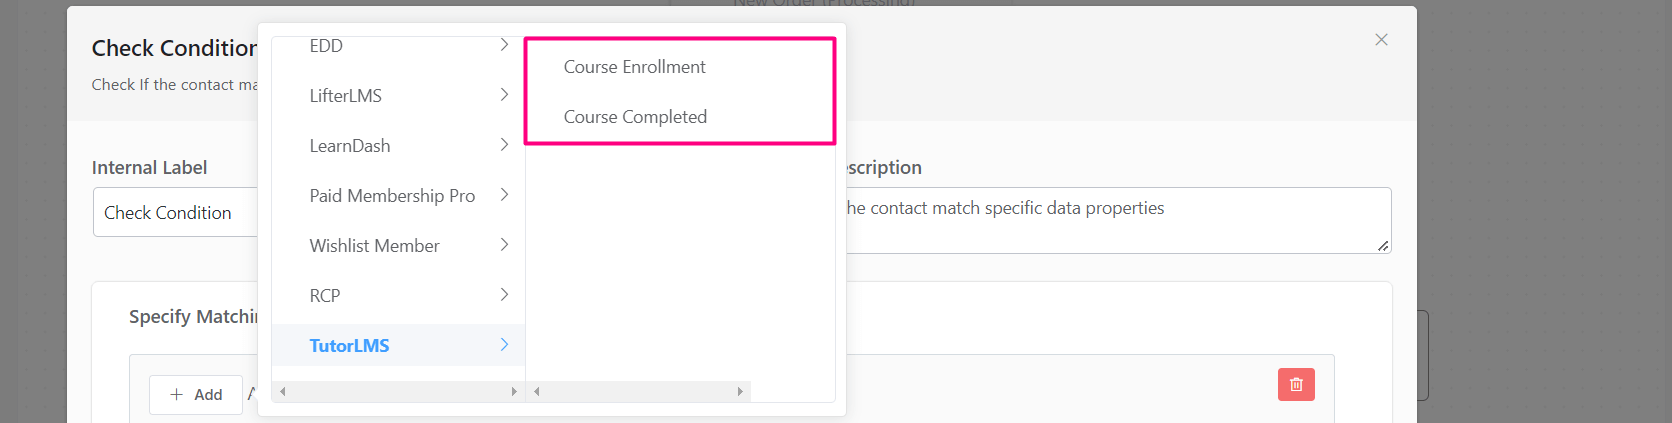 crm action conditional tutorlms